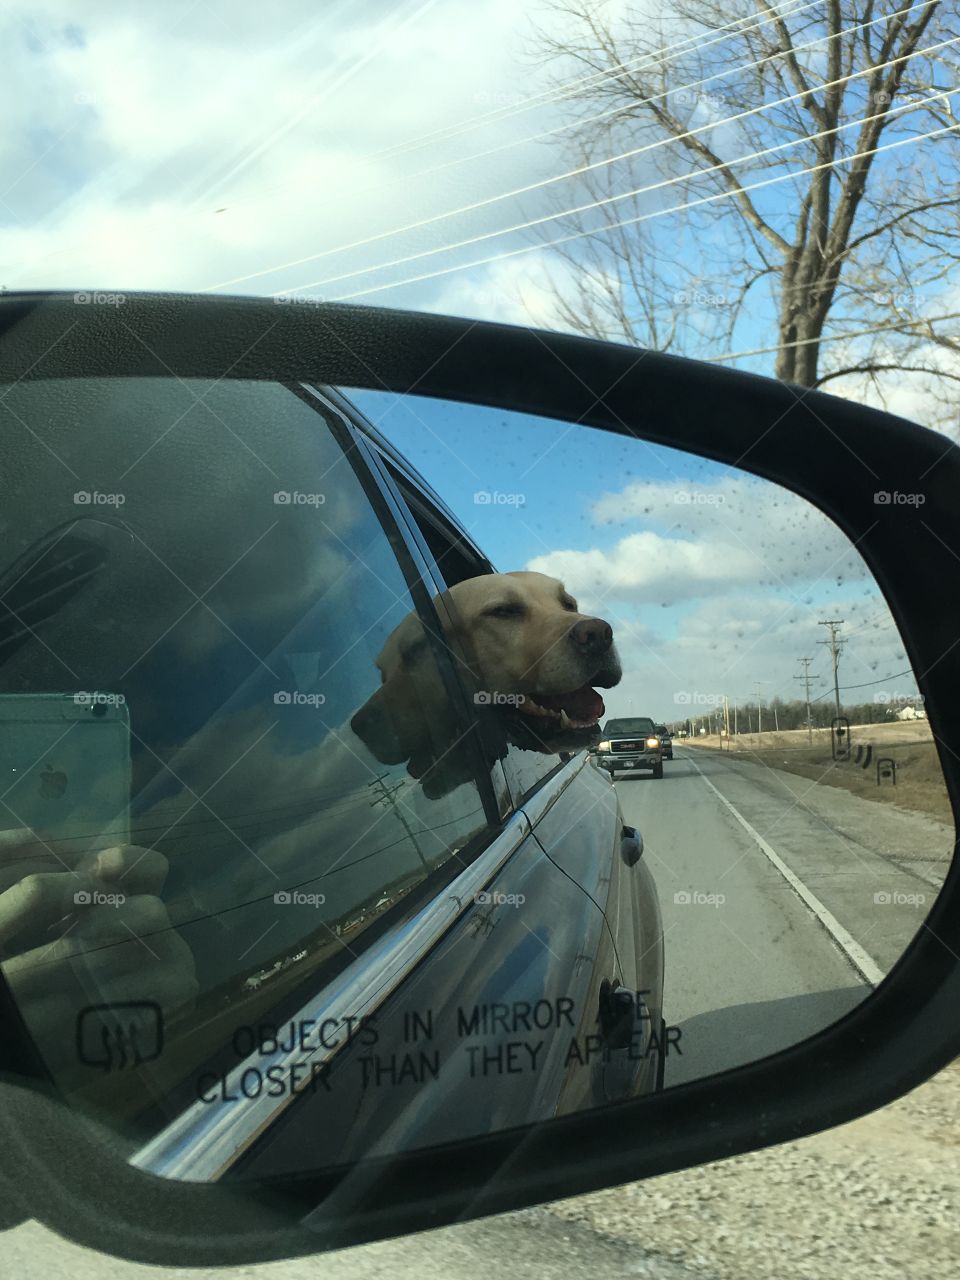 Going for a car ride